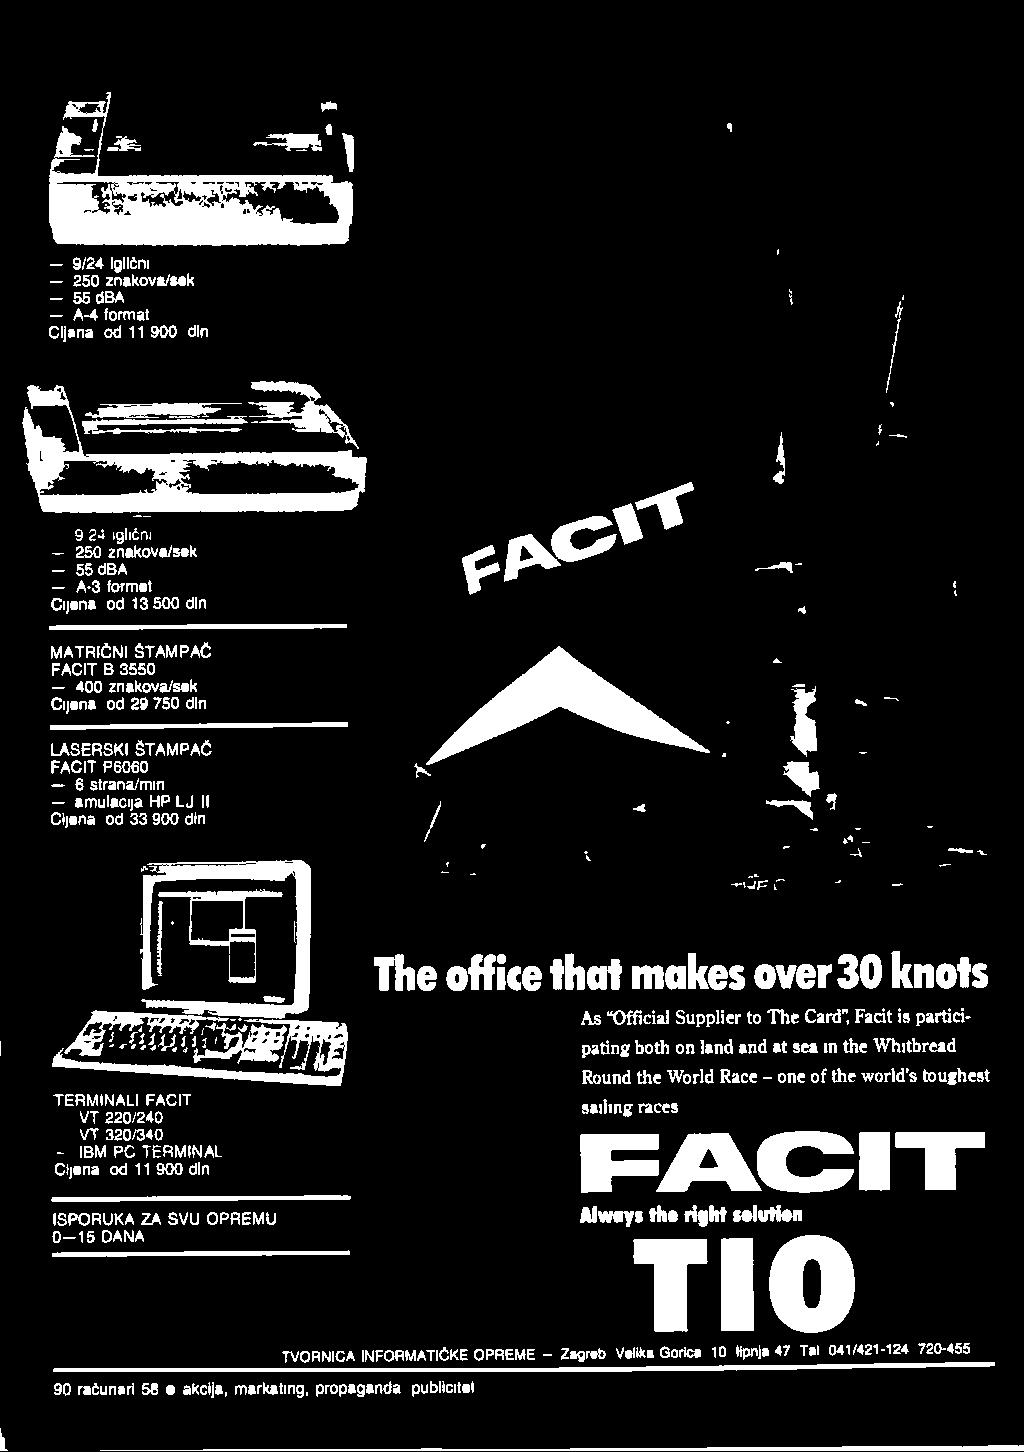 TERMINALI FACiT - IBM PC TERMINAL The office that makes over30 knots As Officia] Supplier to The Card, Fadt is participating both